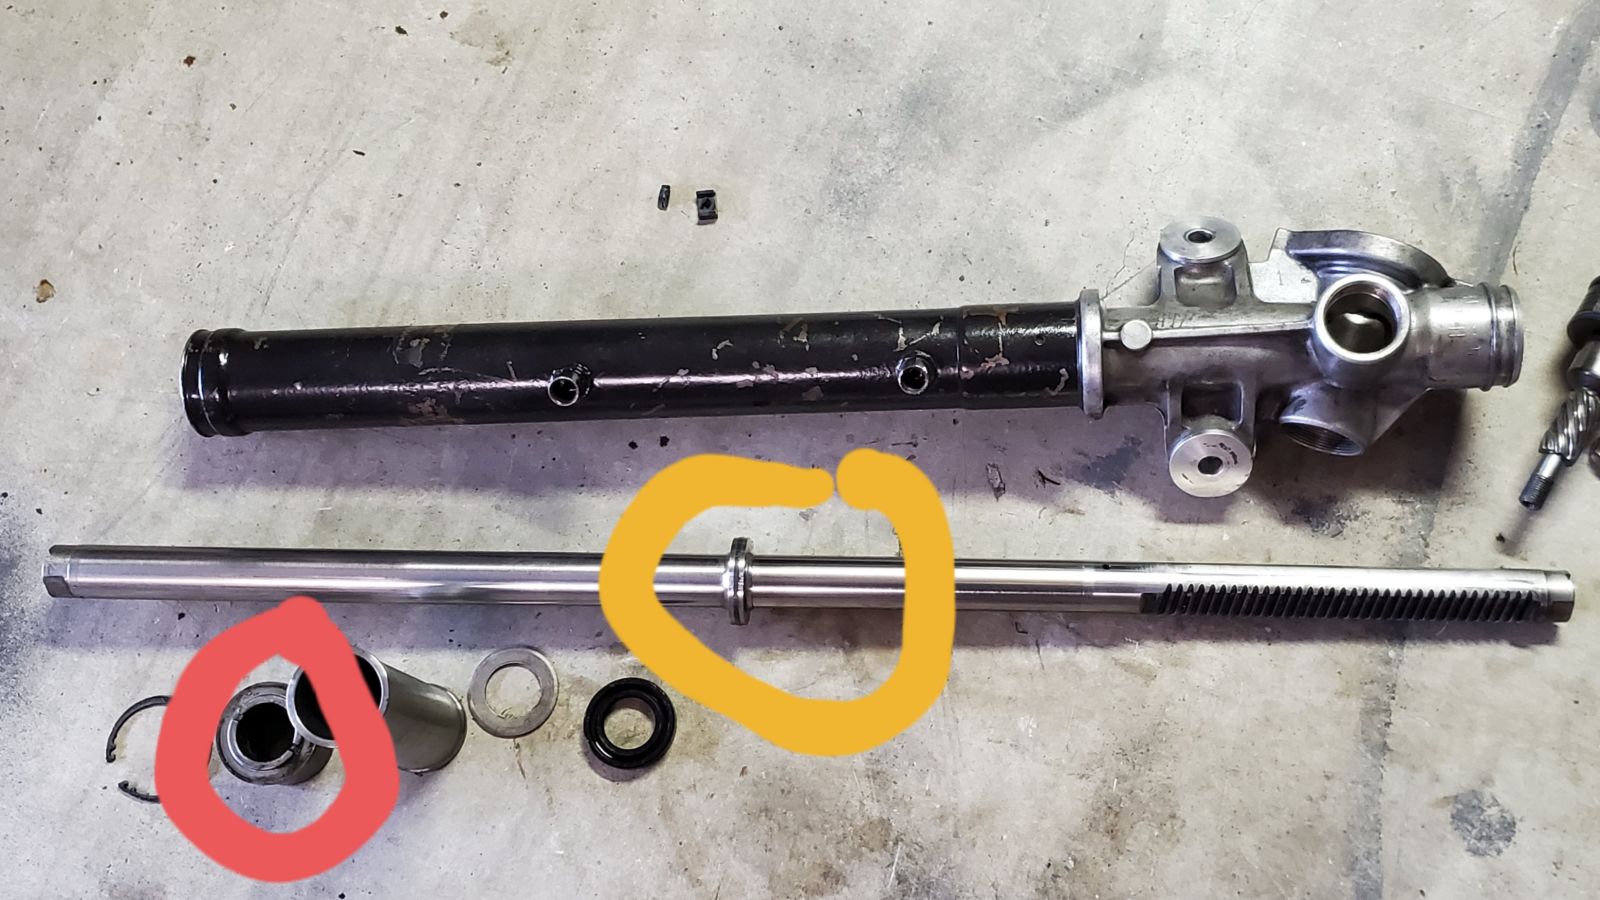 Without bushing (red circle) the only force holding the rack center is pressure between the steering shaft and pressure spring pushing on the back of the rack.